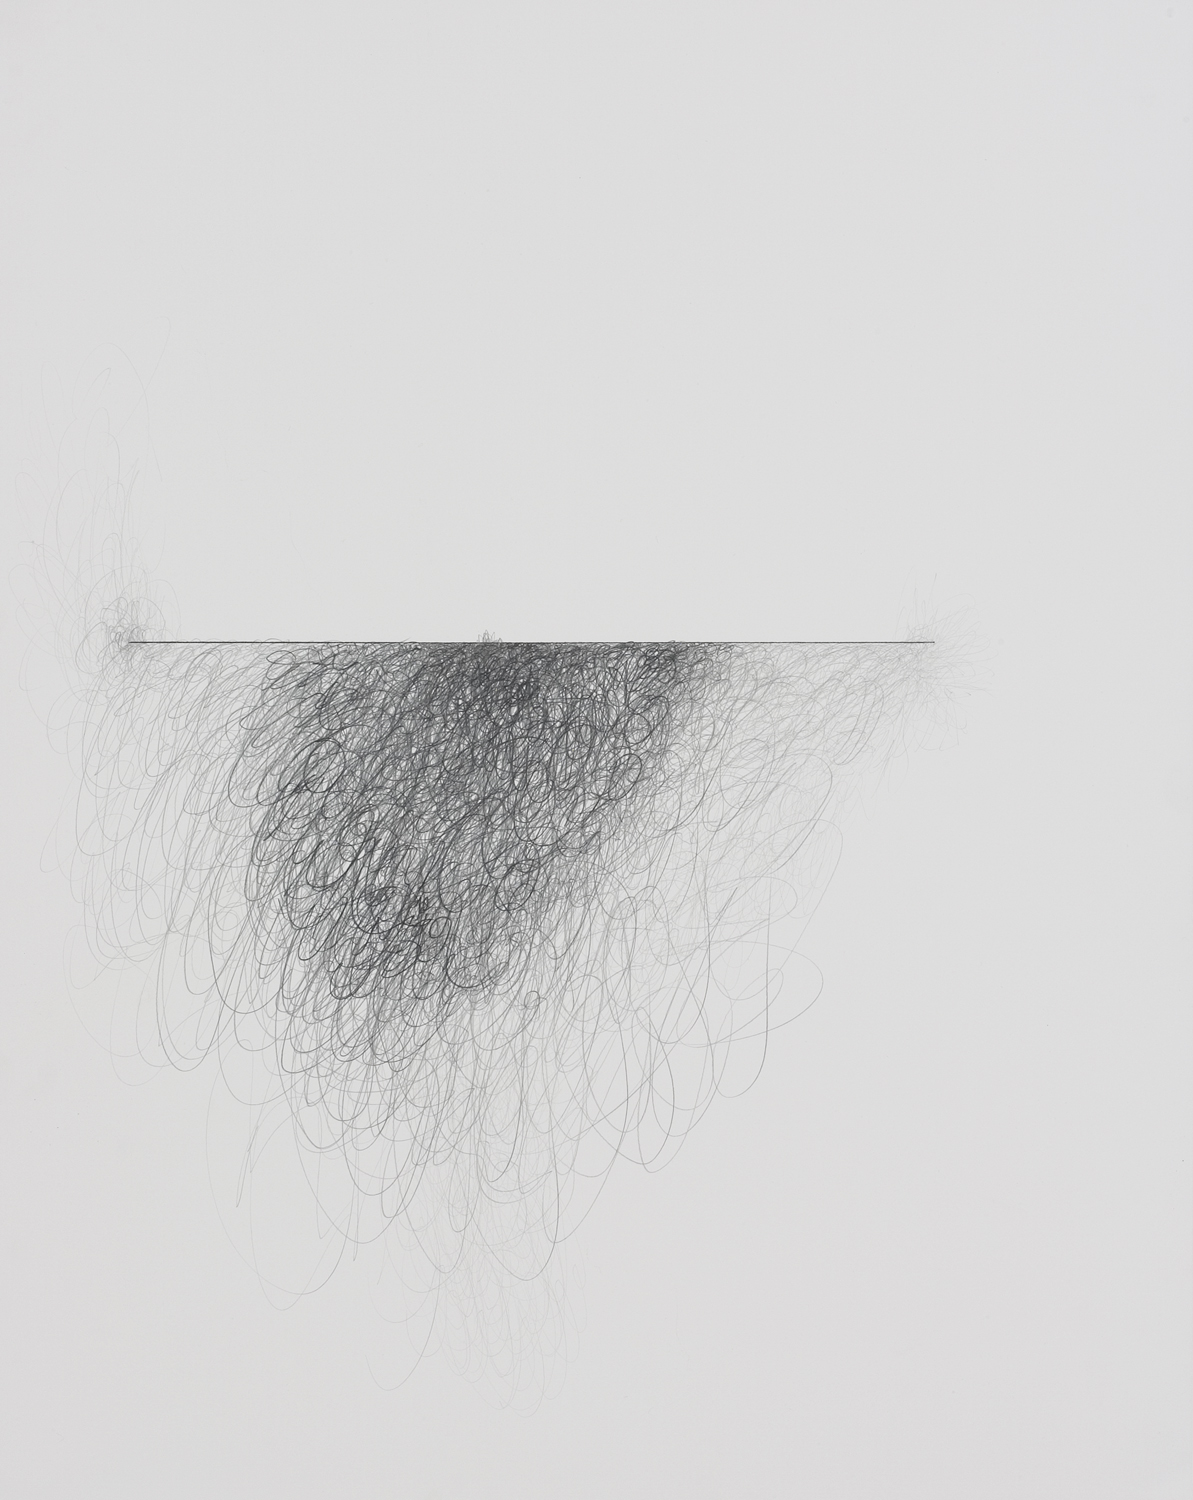  untitled, graphite on paper, 2005, 30 x 22 inches 